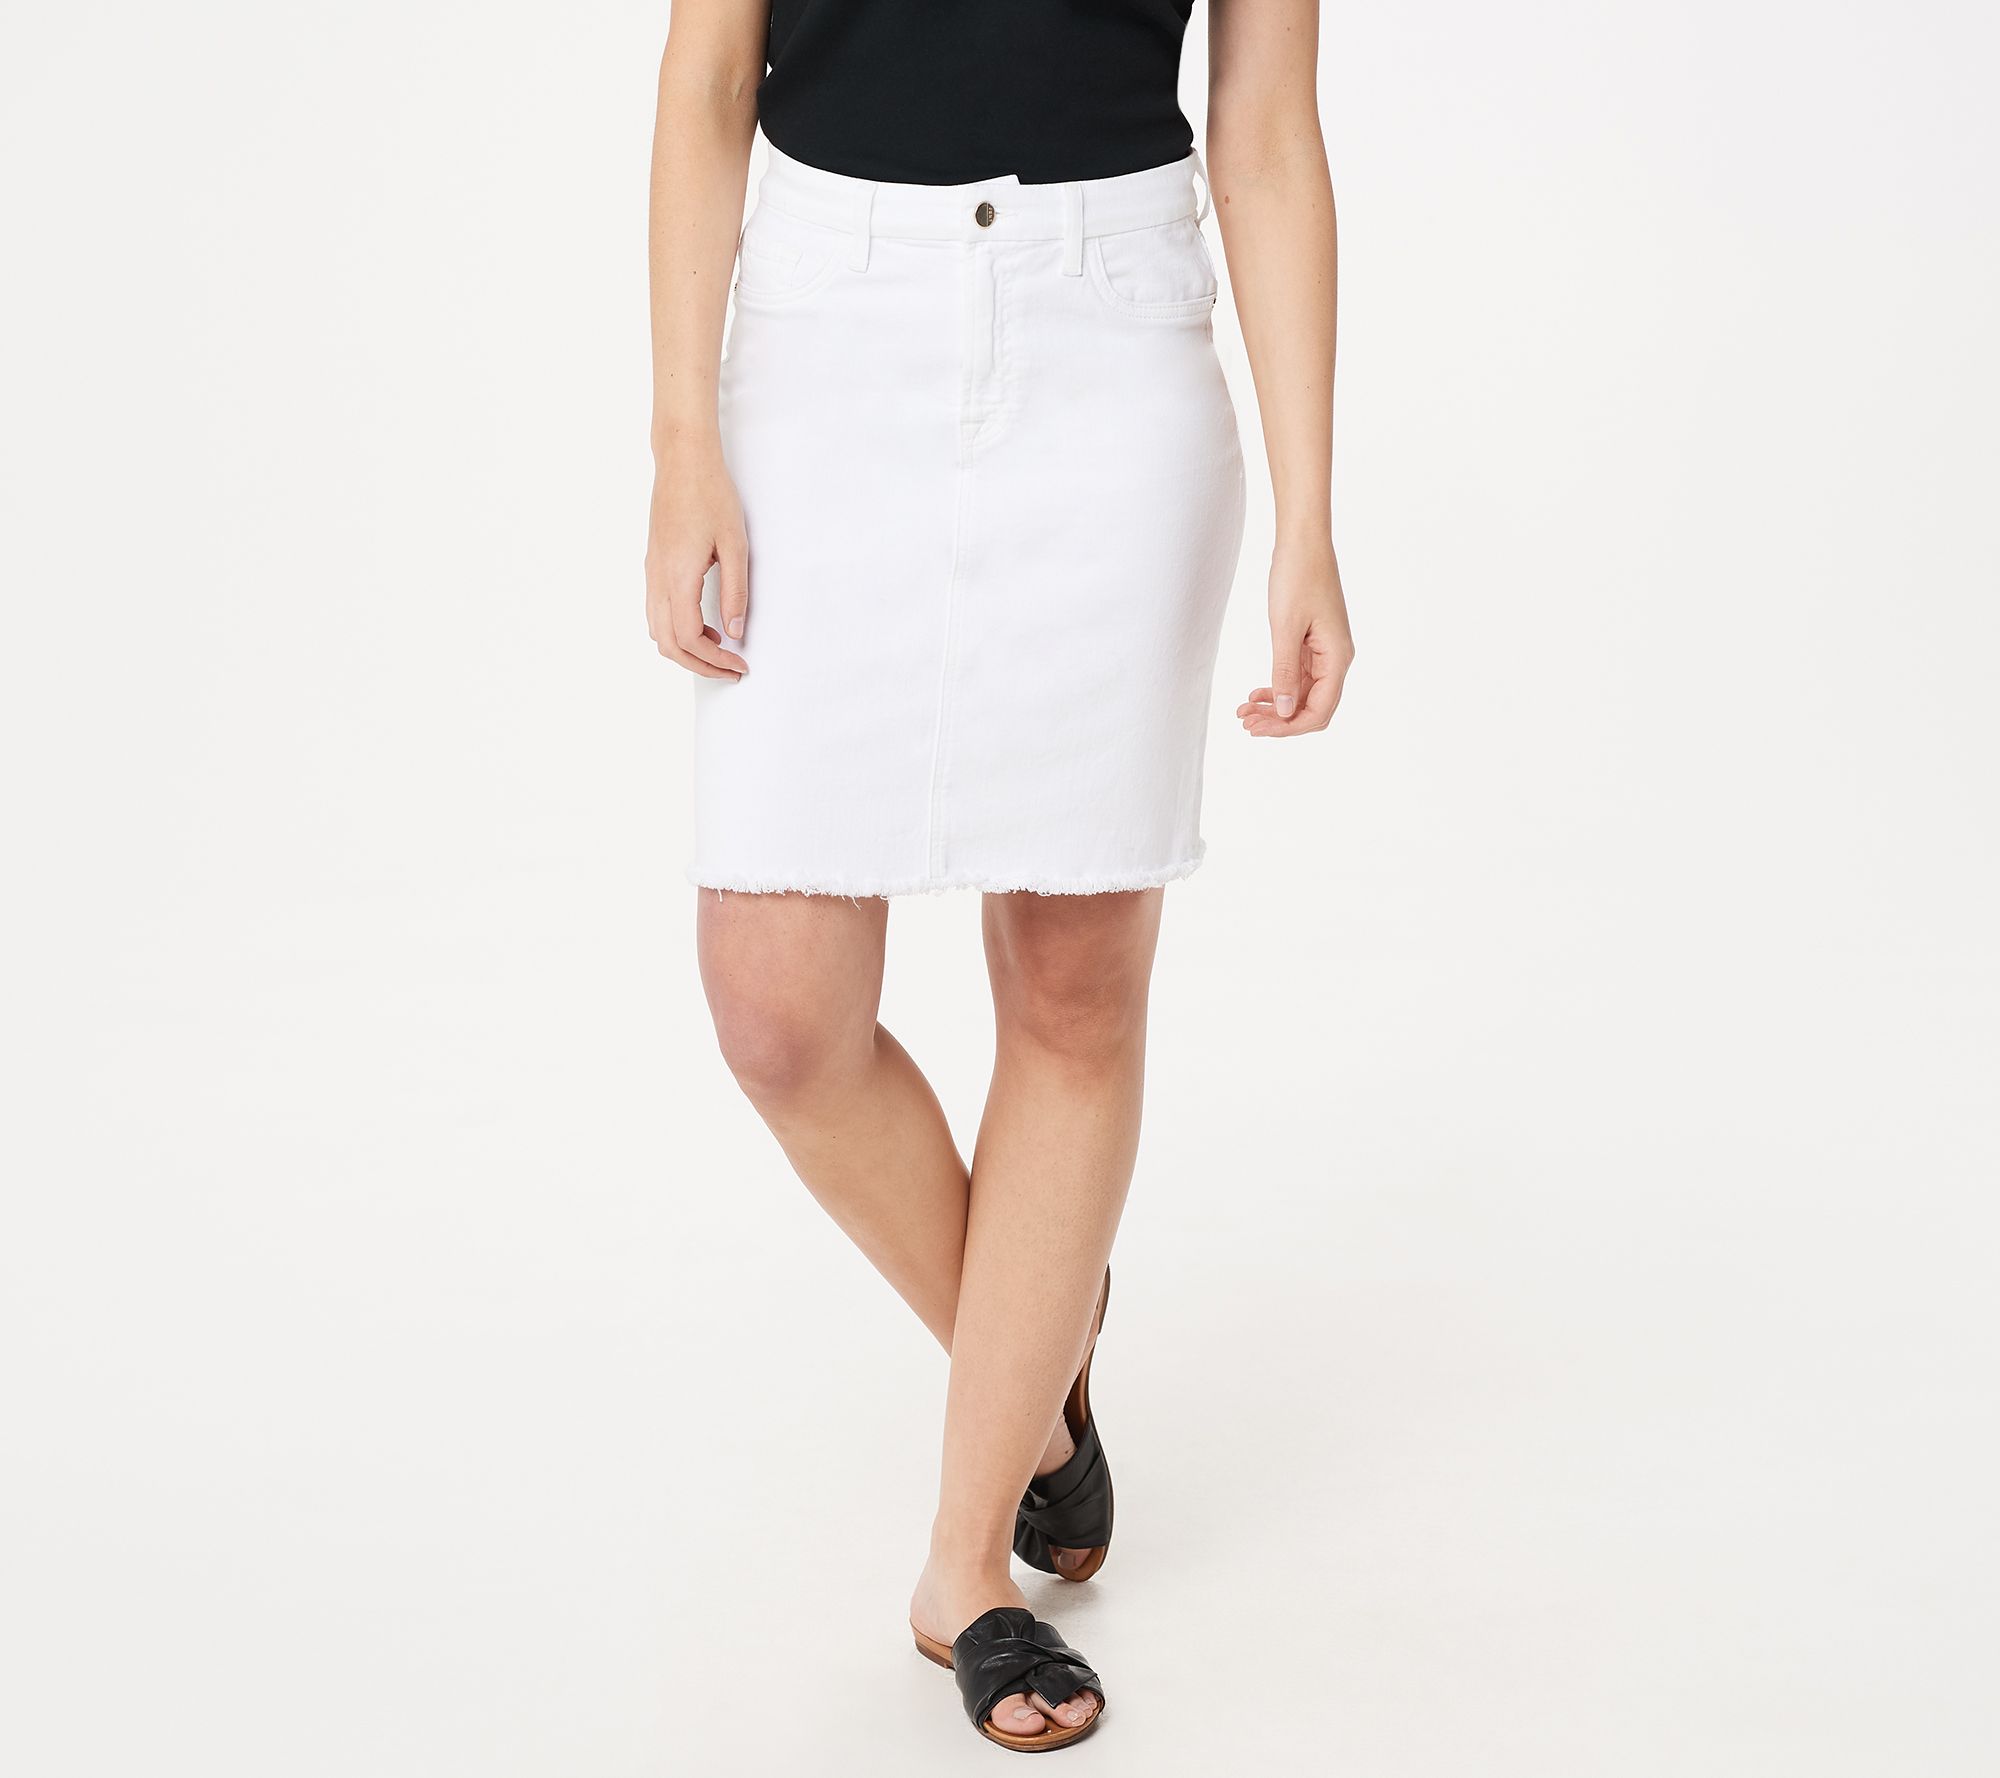 Jen7 by 7 For All Mankind Pencil Skirt - QVC.com